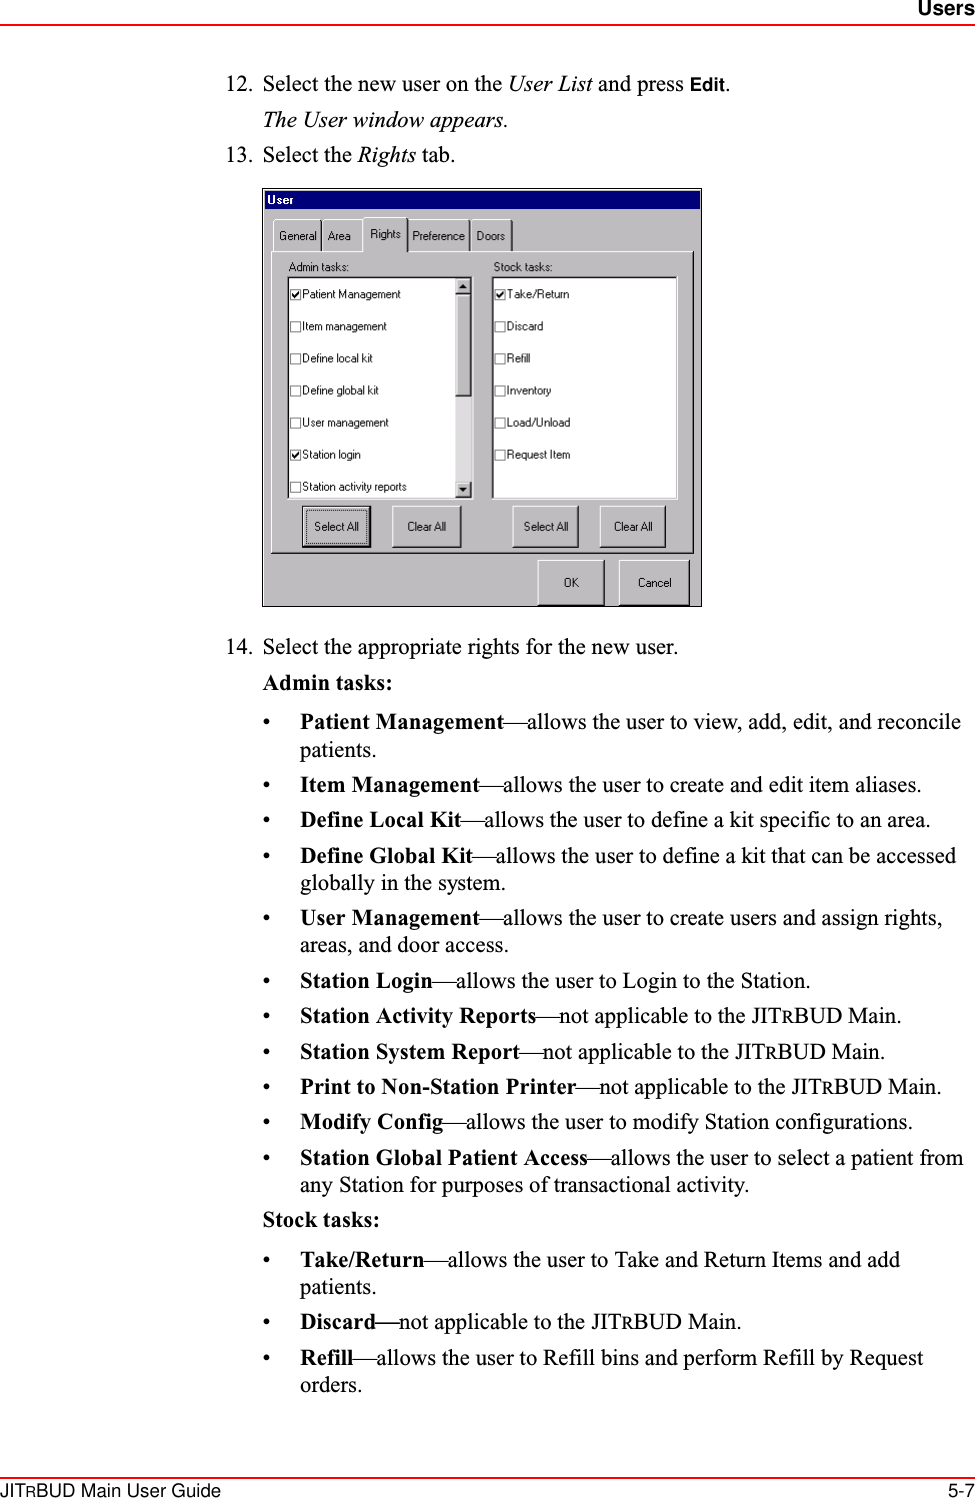 UsersJITRBUD Main User Guide 5-712. Select the new user on the User List and press Edit. The User window appears. 13. Select the Rights tab.14. Select the appropriate rights for the new user.Admin tasks:•Patient Management—allows the user to view, add, edit, and reconcile patients.•Item Management—allows the user to create and edit item aliases.•Define Local Kit—allows the user to define a kit specific to an area.•Define Global Kit—allows the user to define a kit that can be accessed globally in the system.•User Management—allows the user to create users and assign rights, areas, and door access.•Station Login—allows the user to Login to the Station.•Station Activity Reports—not applicable to the JITRBUD Main.•Station System Report—not applicable to the JITRBUD Main.•Print to Non-Station Printer—not applicable to the JITRBUD Main.•Modify Config—allows the user to modify Station configurations.•Station Global Patient Access—allows the user to select a patient from any Station for purposes of transactional activity.Stock tasks:•Take/Return—allows the user to Take and Return Items and add patients.•Discard—not applicable to the JITRBUD Main.•Refill—allows the user to Refill bins and perform Refill by Request orders.